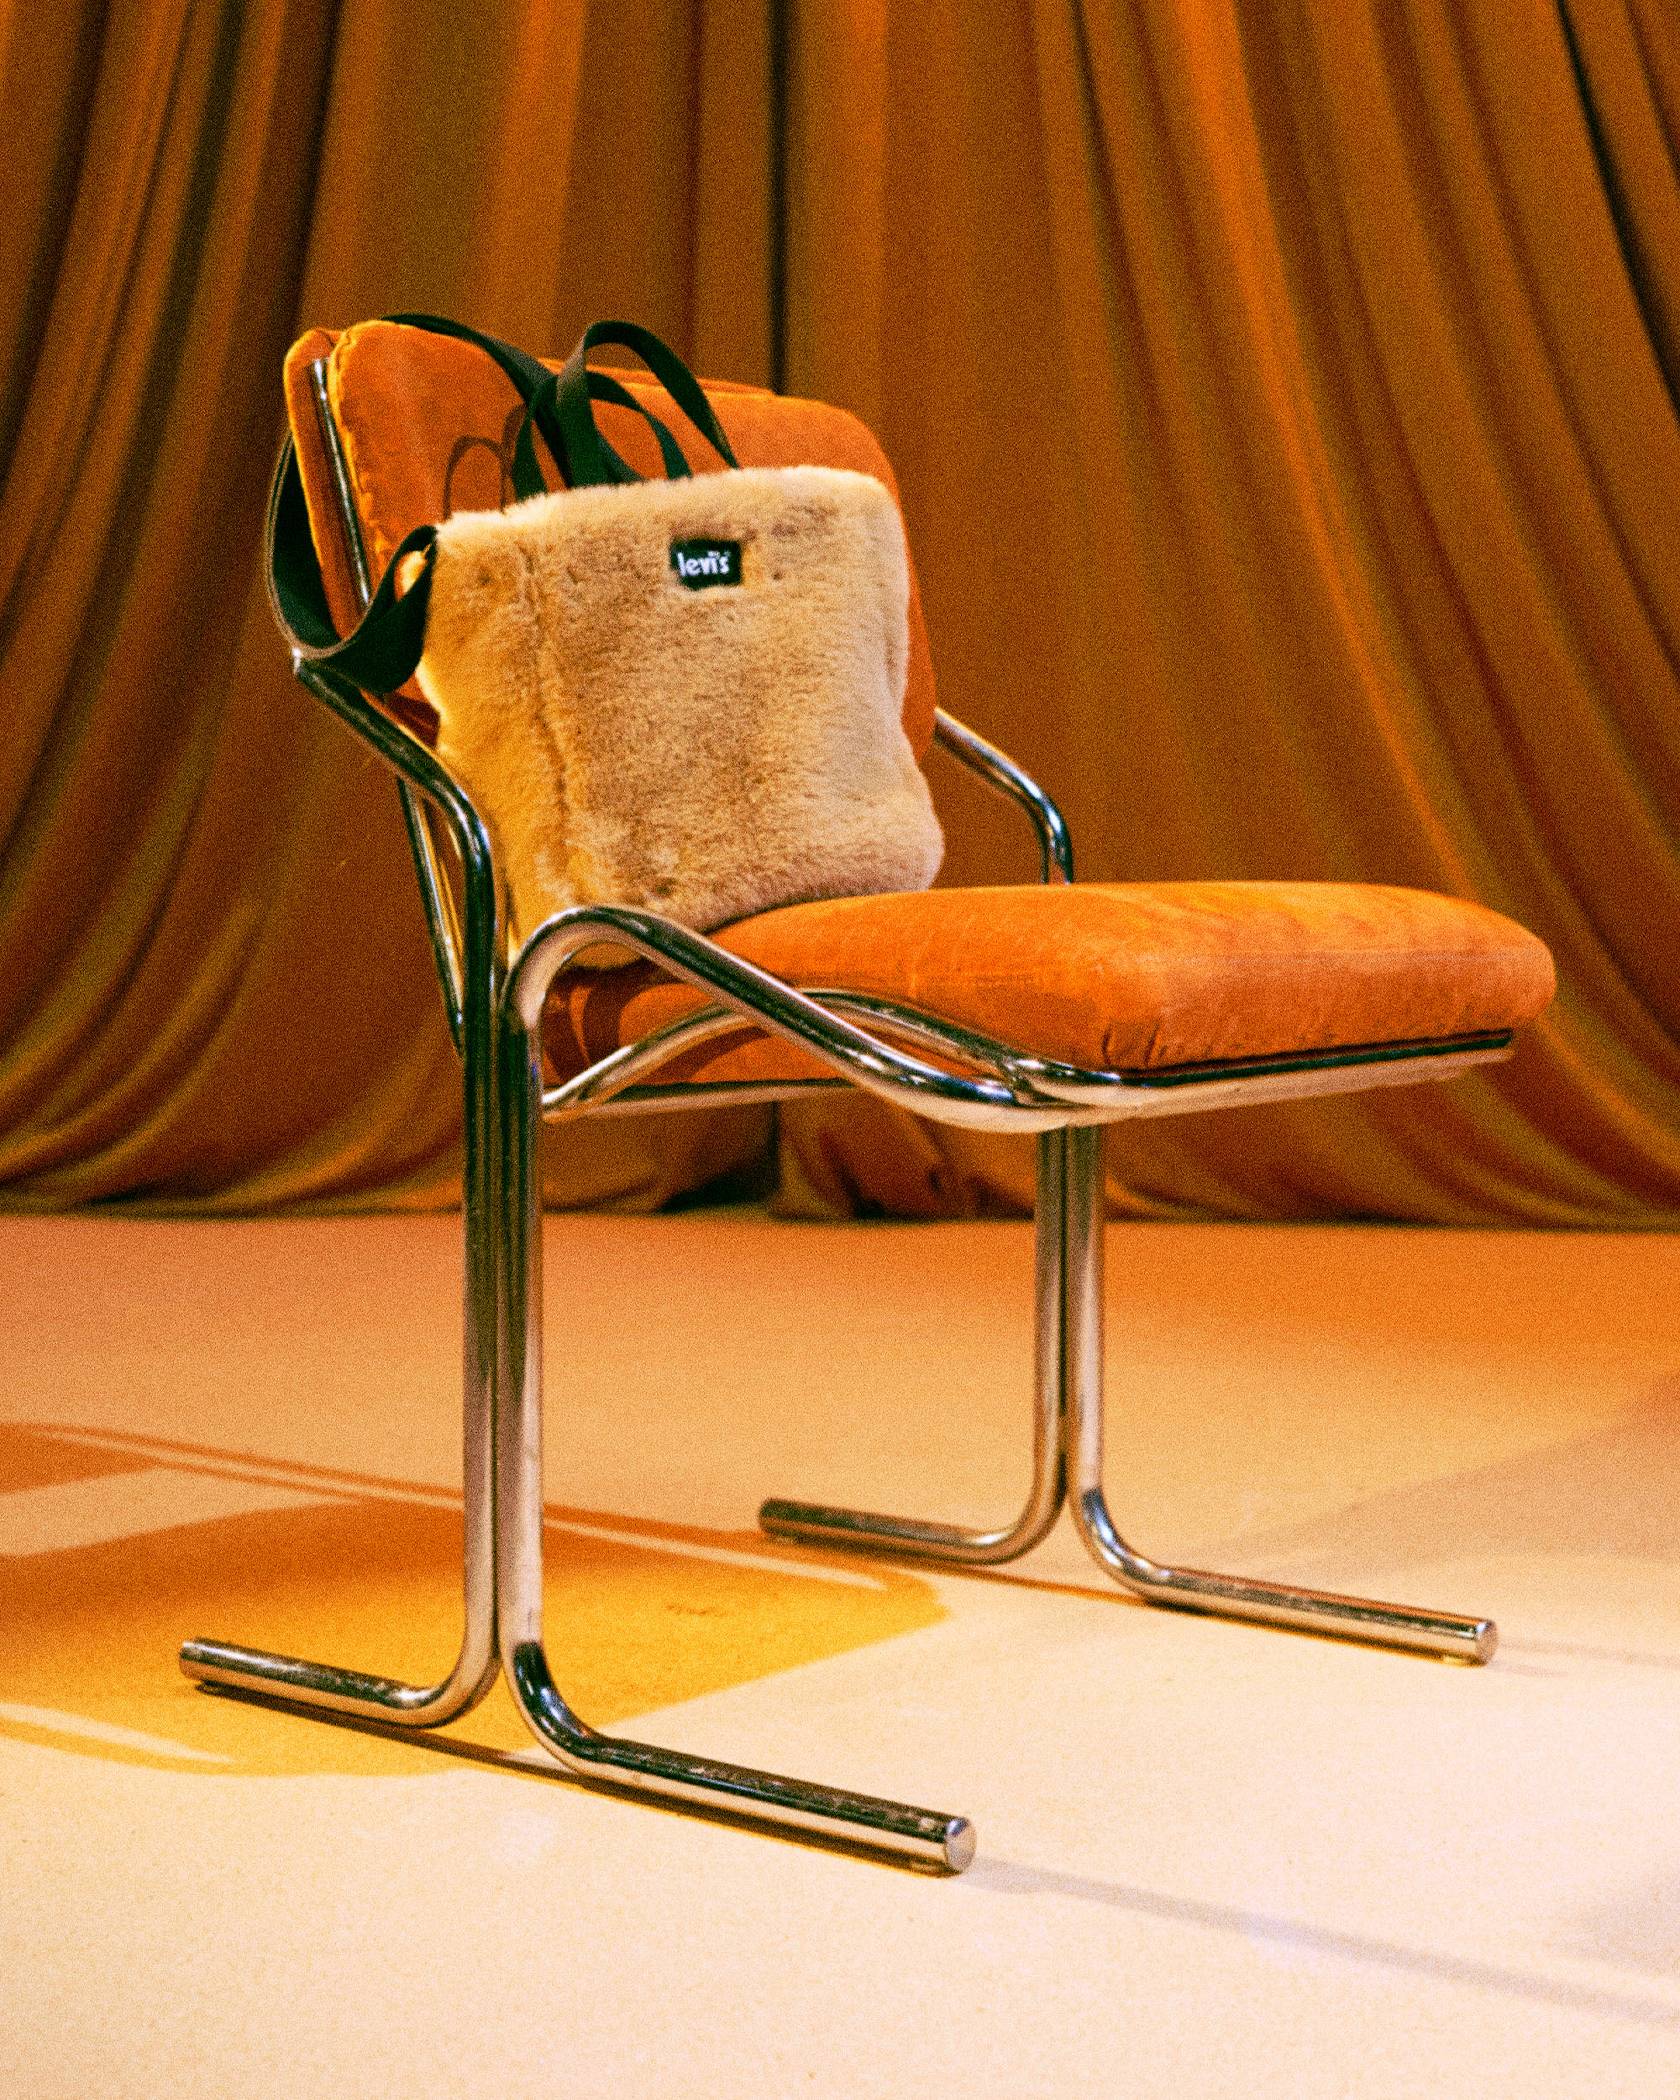 Fuzzy cream bag sitting on a mid century chair against a golden burnt orange backdrop